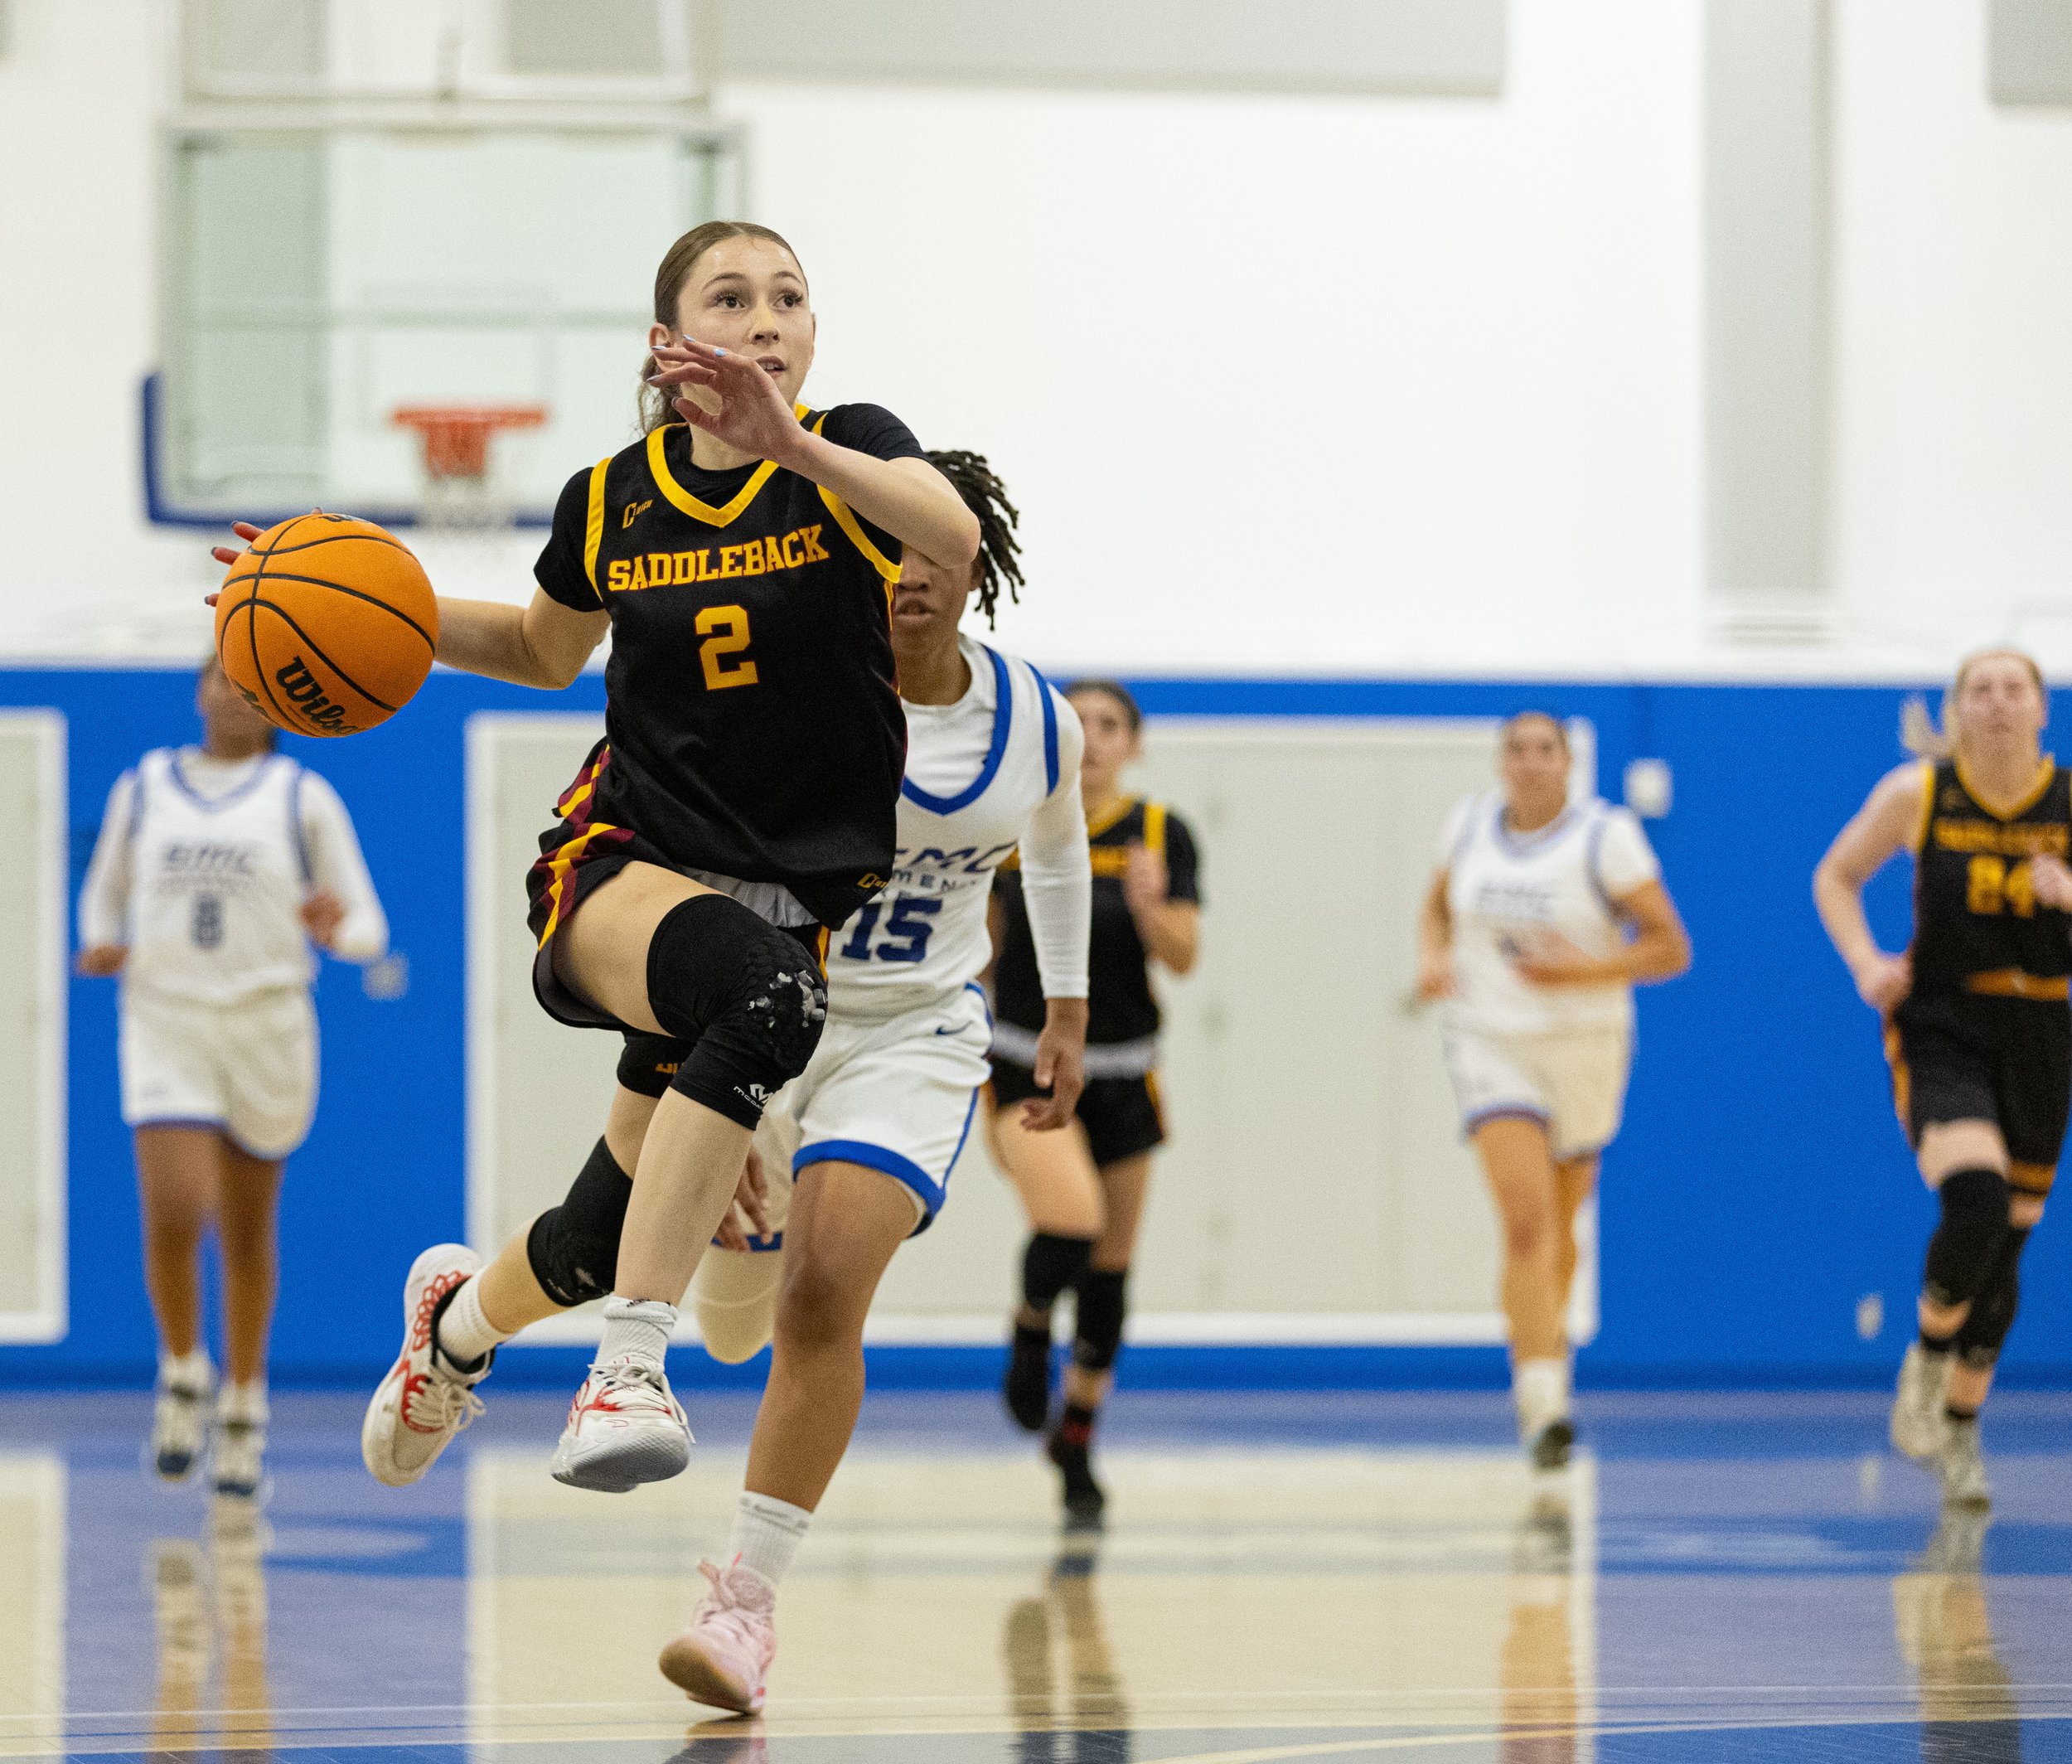  Bobcat guard Aleksia Gadea(2) from Saddleback College getting passed Santa Monica College(SMC) Corsair Jaiyahne Henderson(15) to get a layup in the SMC Pavillion Gym at Santa Monica, Calif. Corsairs lost 62-50 to put them in a 3-game losing streak o